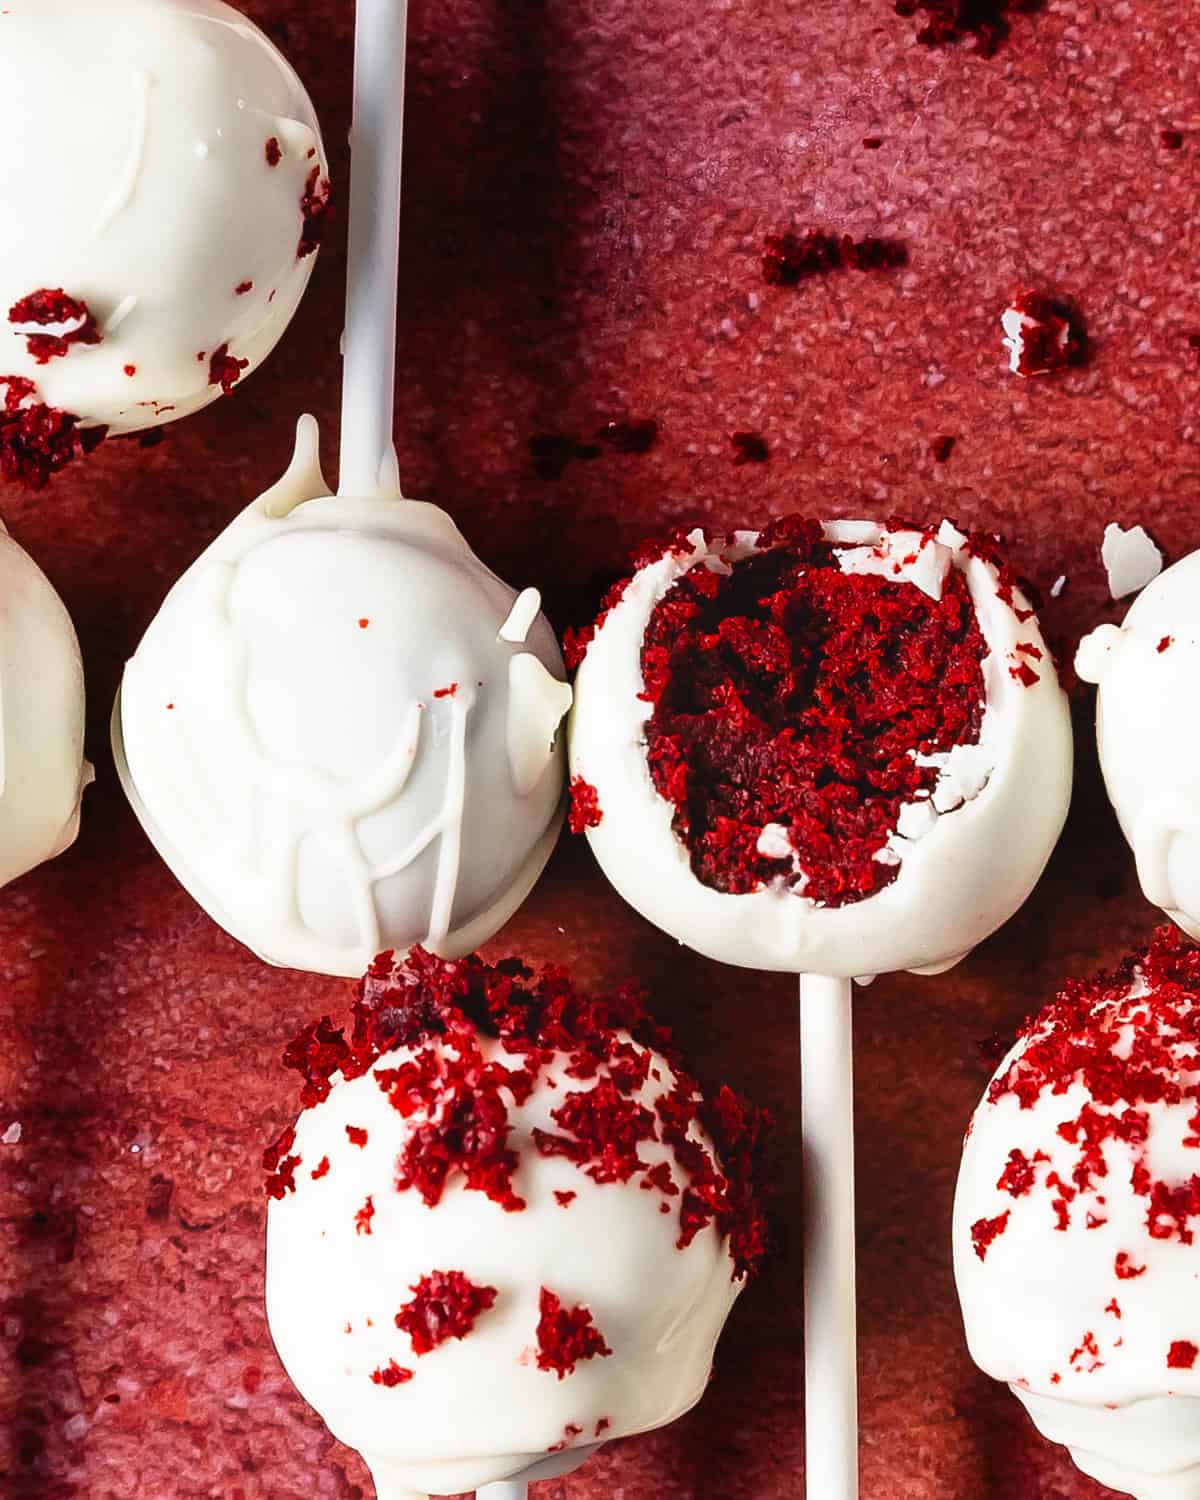 Red velvet cake pops are decadent and delicious red velvet cake balls made from red velvet cake and cream cheese frosting covered in white chocolate. These red velvet truffles are super simple to make using box cake mix, store bought frosting and white chocolate candy melts. 